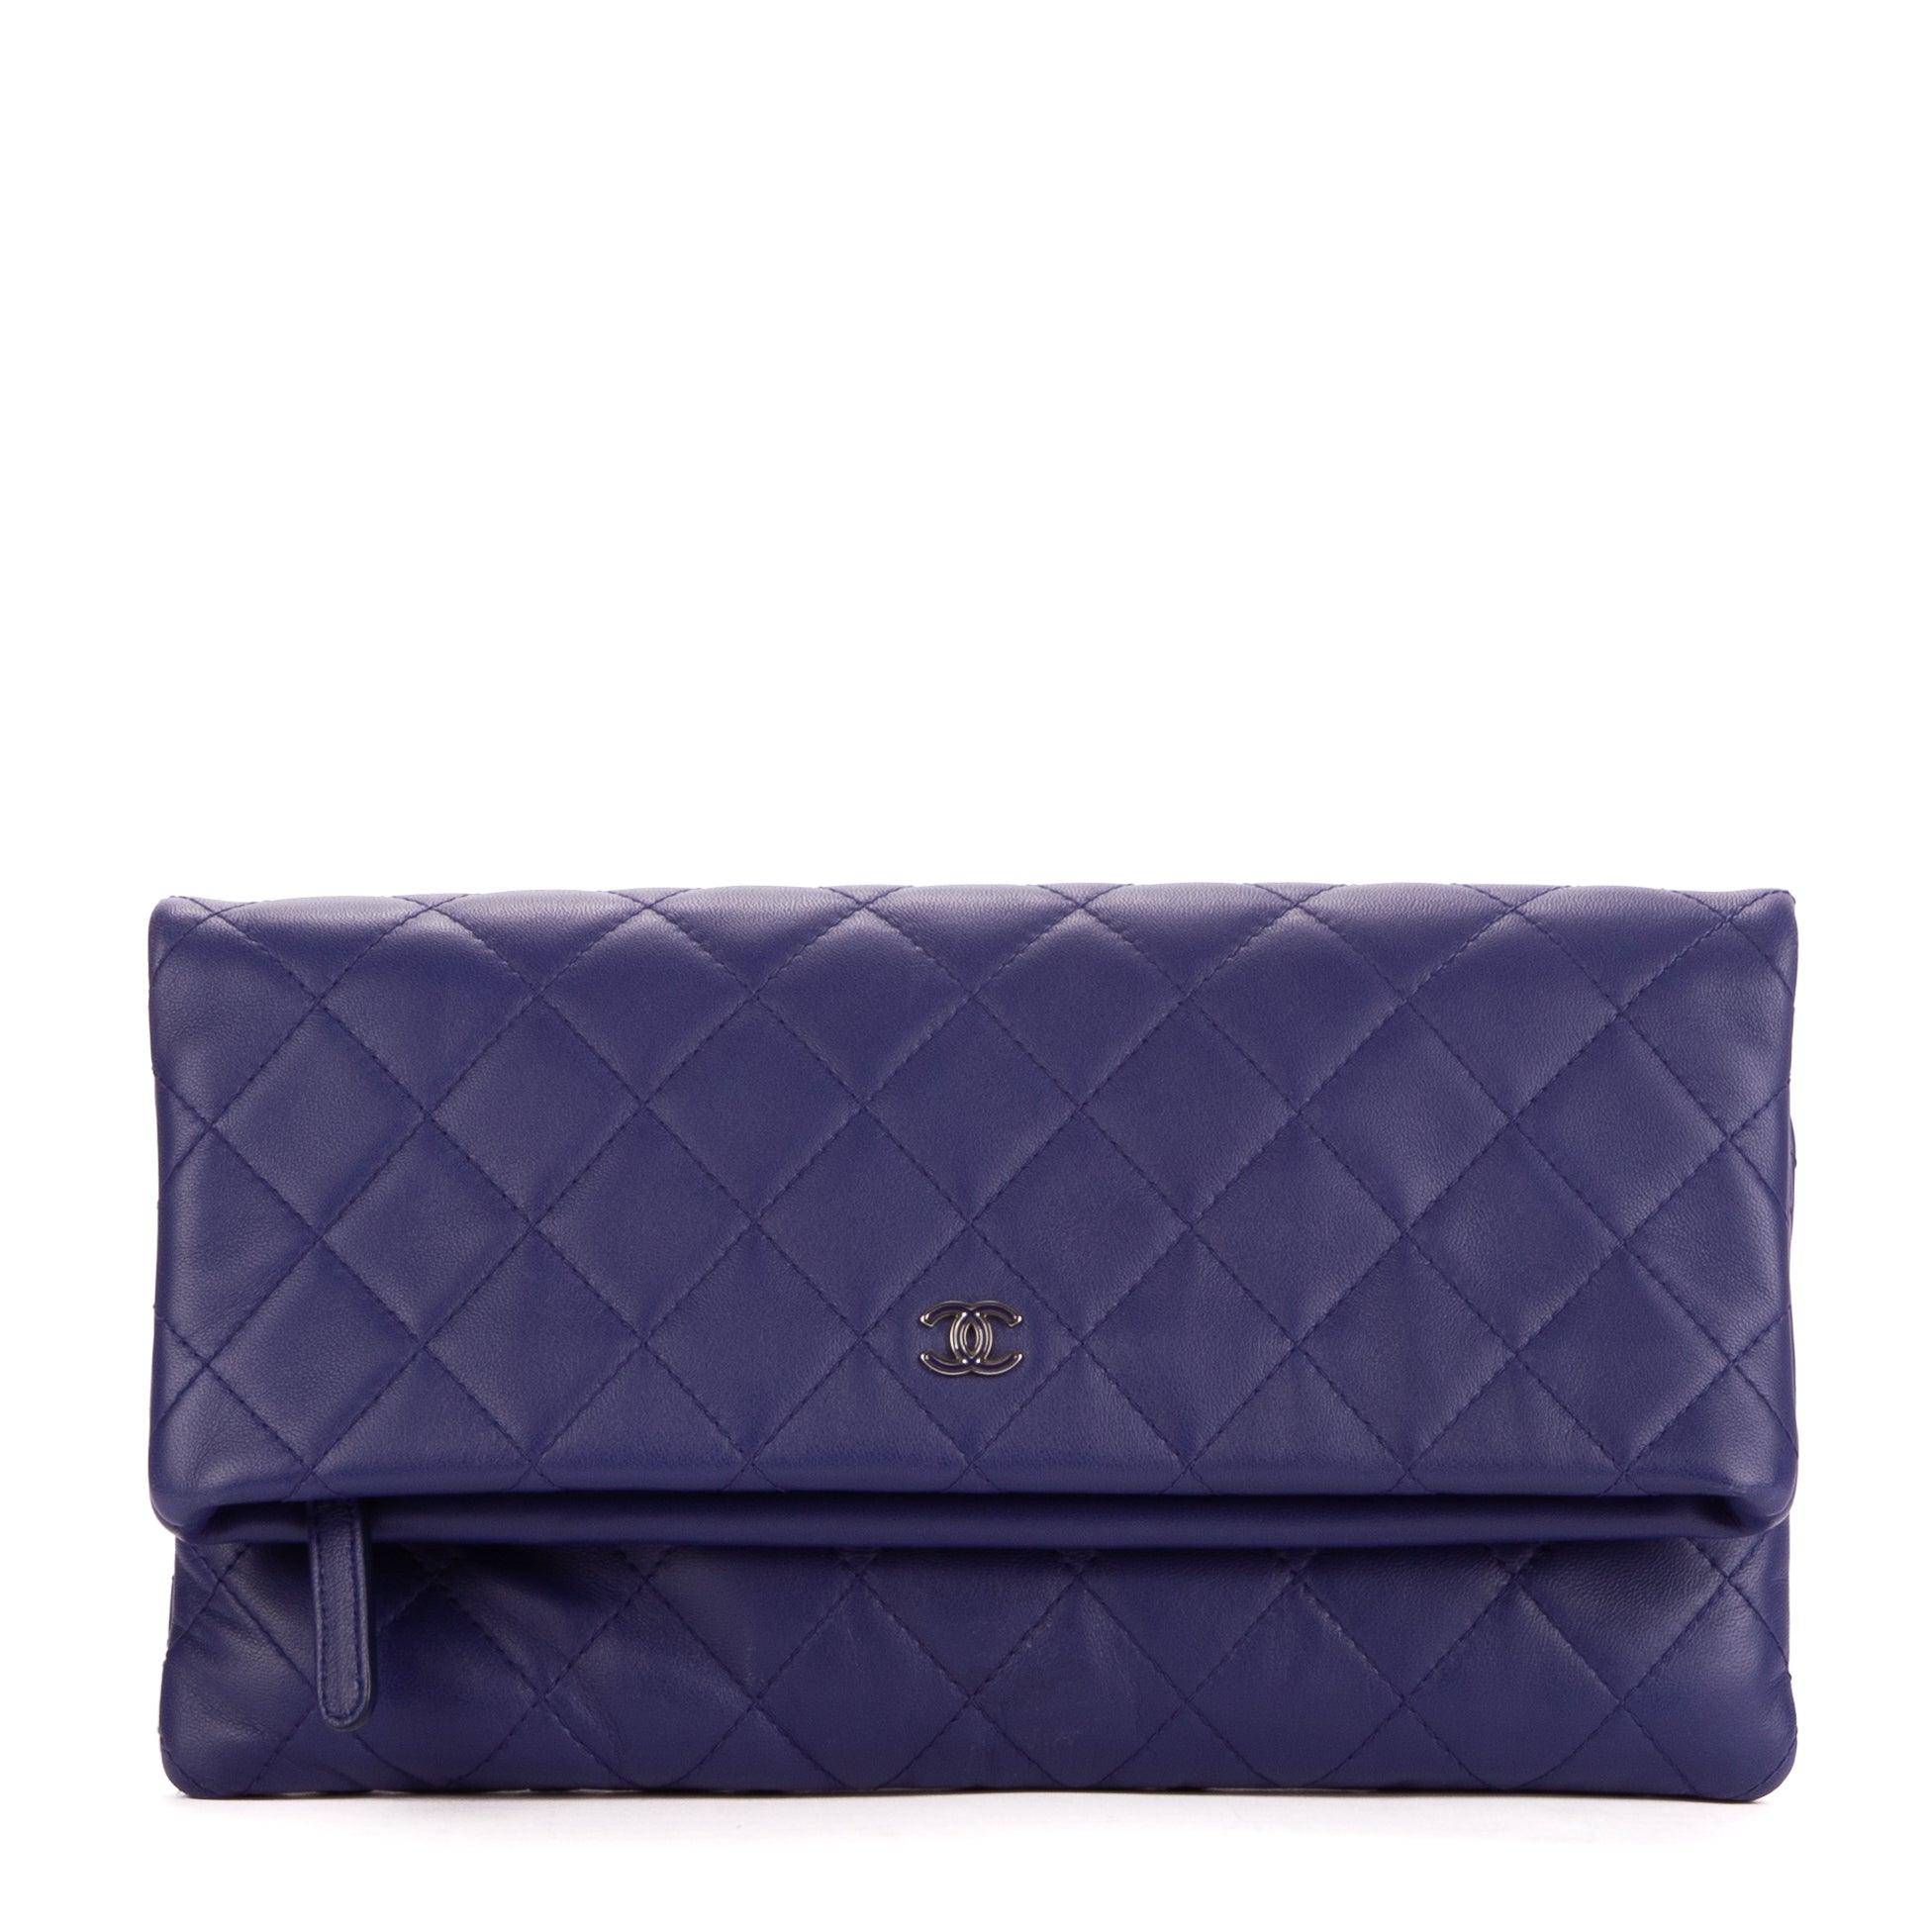 Chanel Mary Clutch in Purple